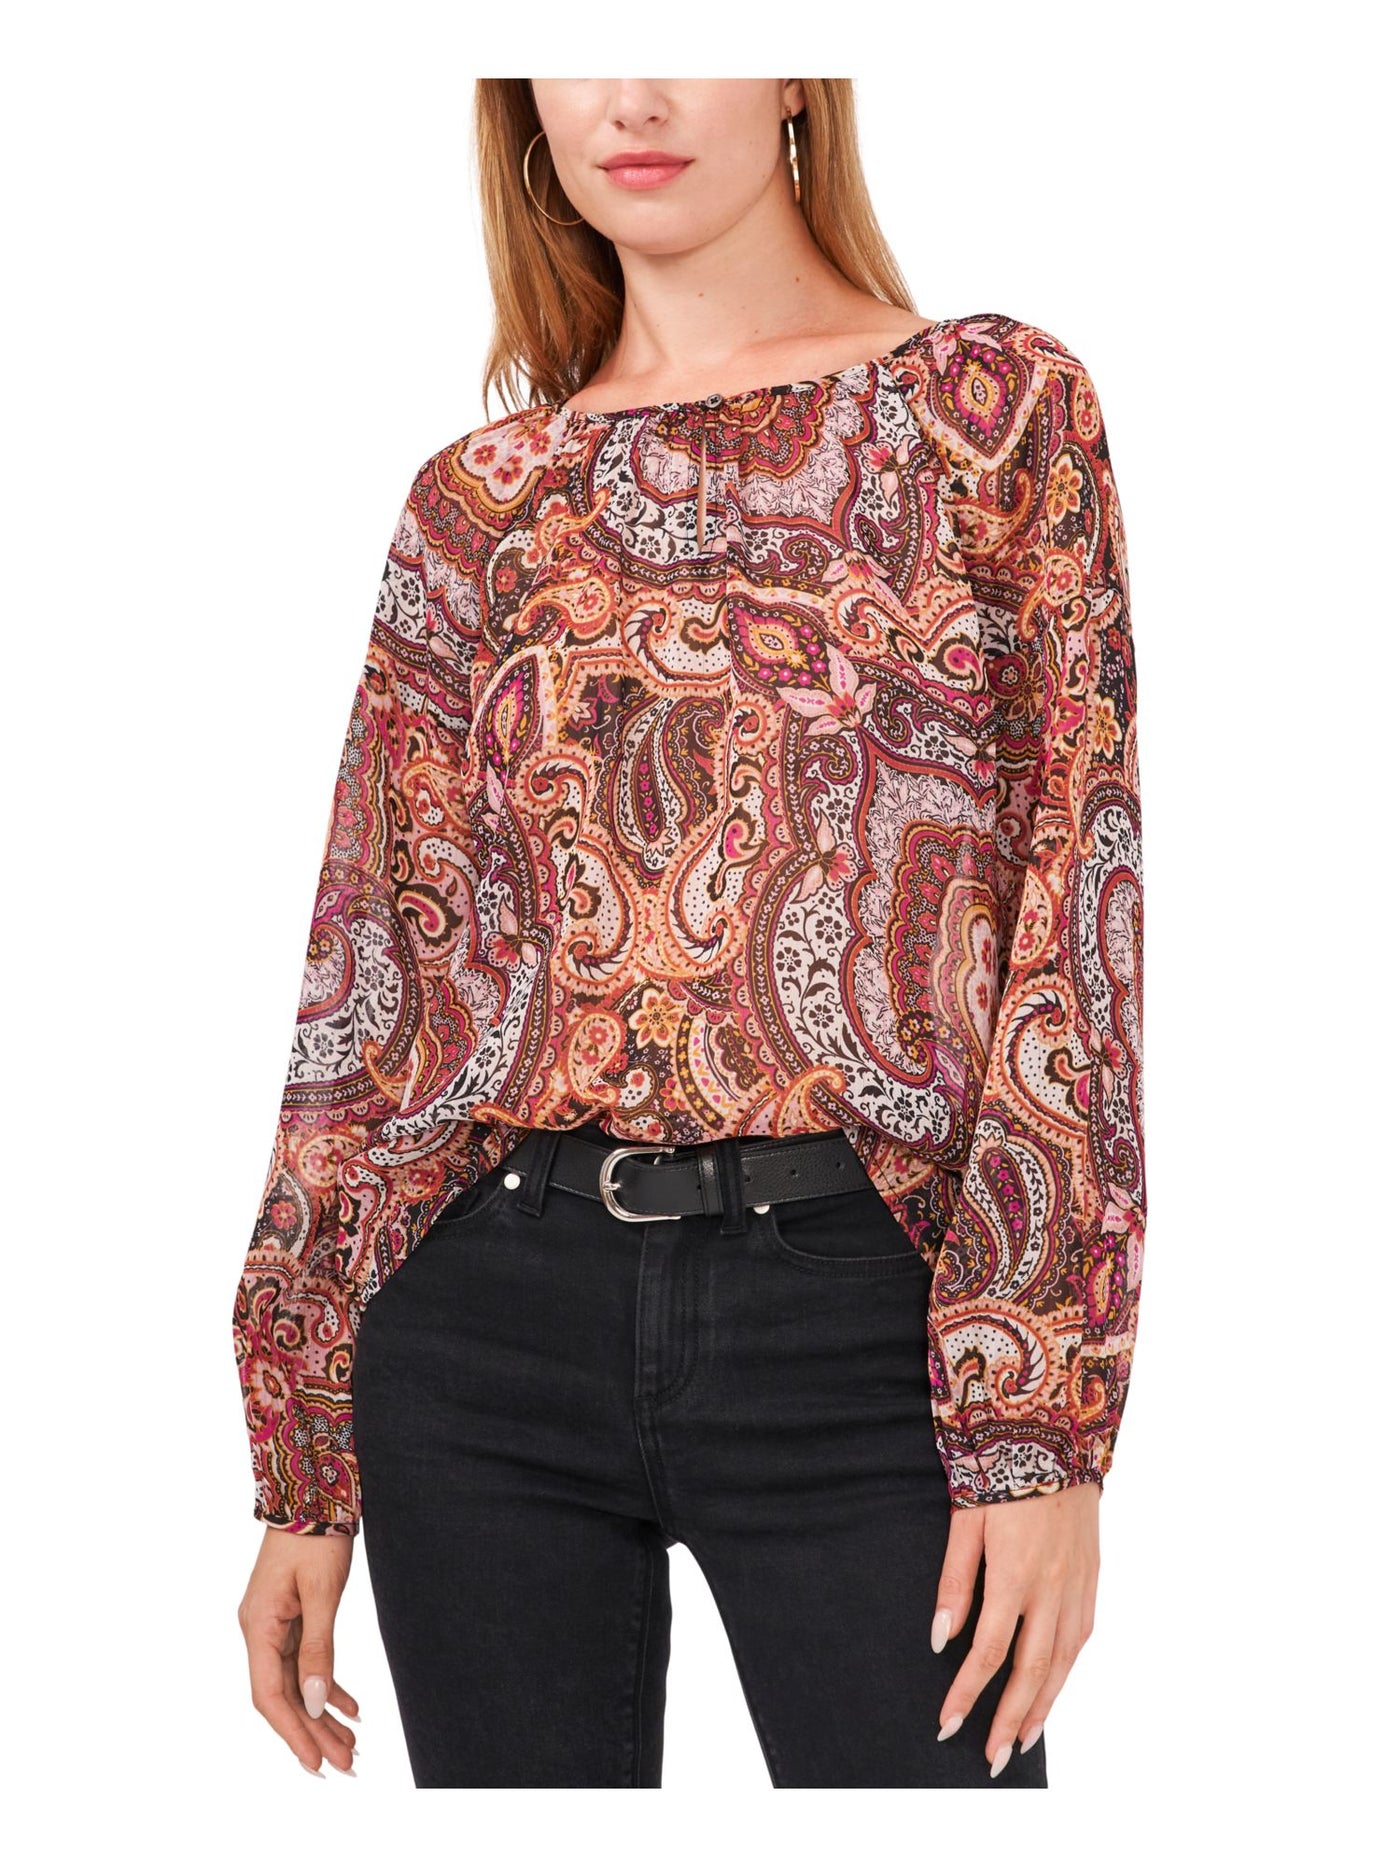 VINCE CAMUTO Womens Pink Sheer Metallic Paisley Long Sleeve Keyhole Wear To Work Blouse XS